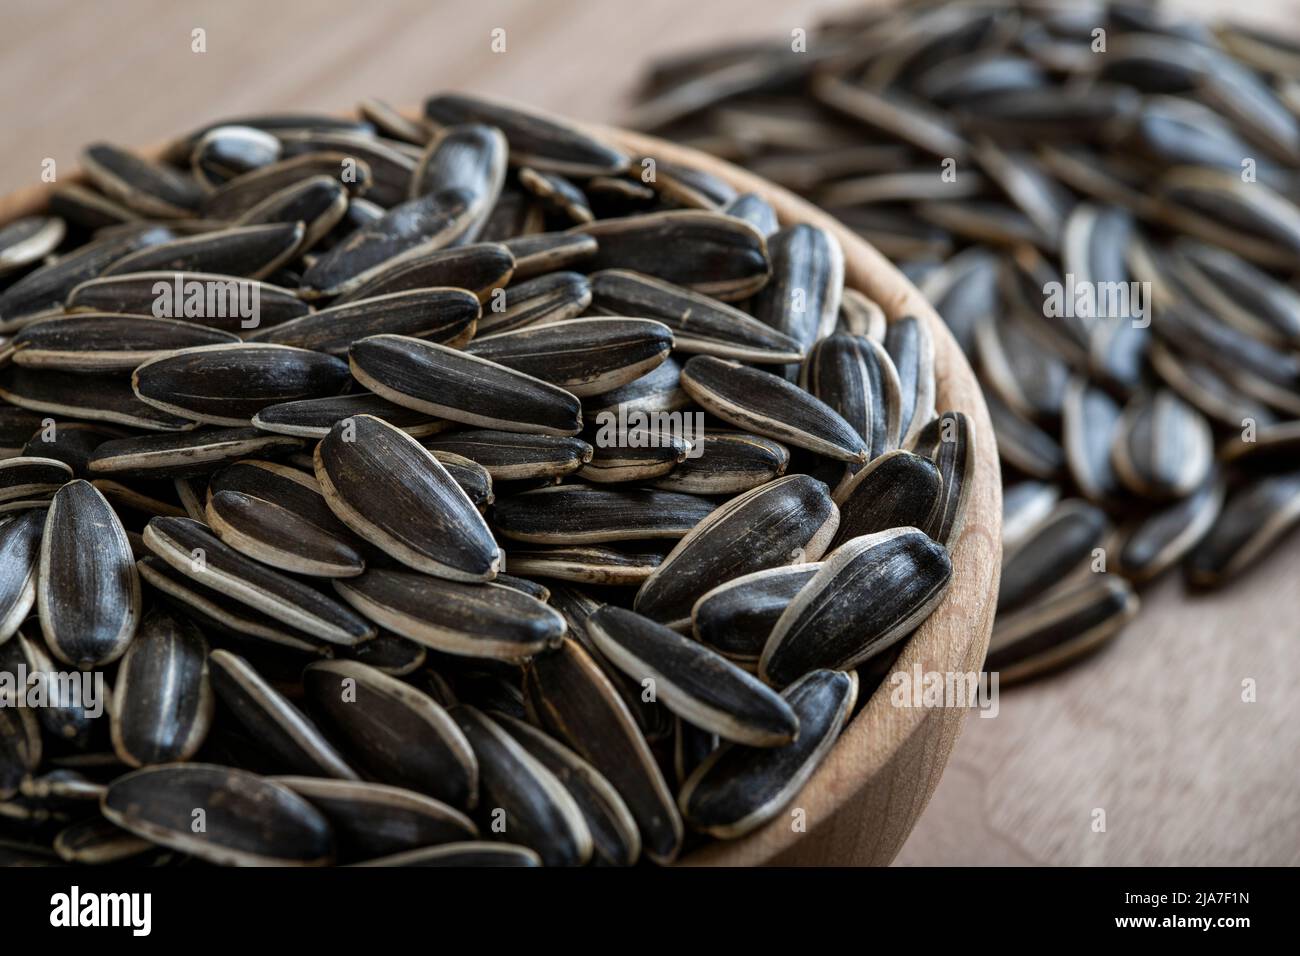 Black sunflower seeds in a bowl on wooden background Stock Photo